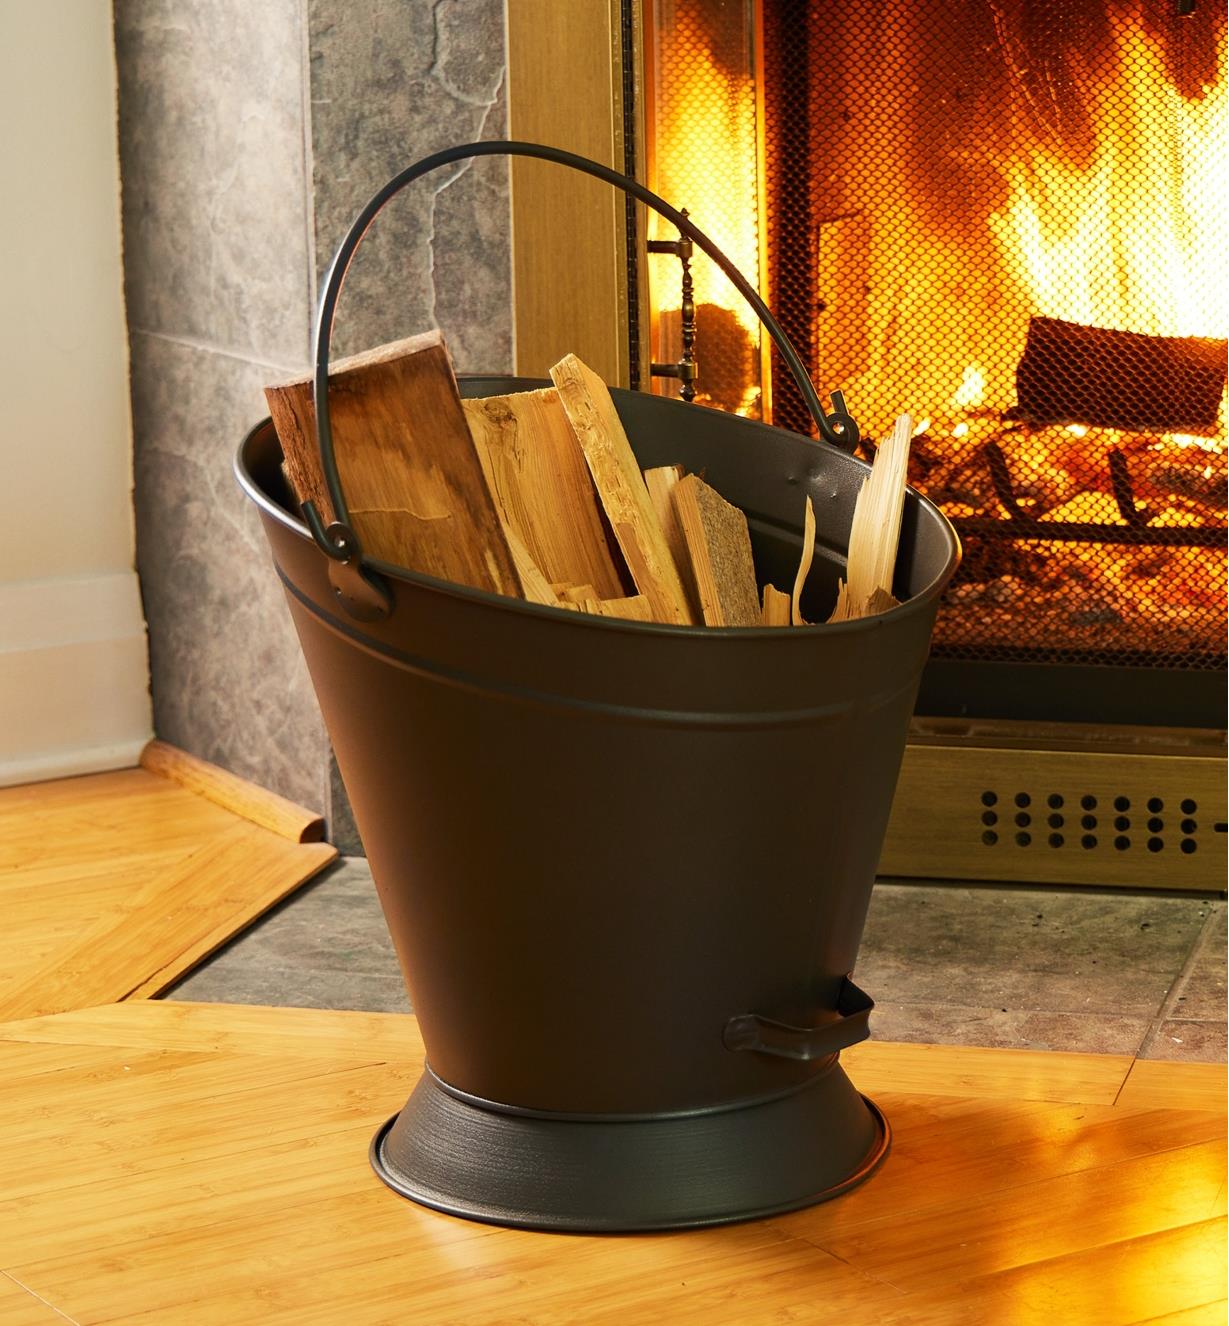 The coal scuttle containing kindling sits near a fireplace